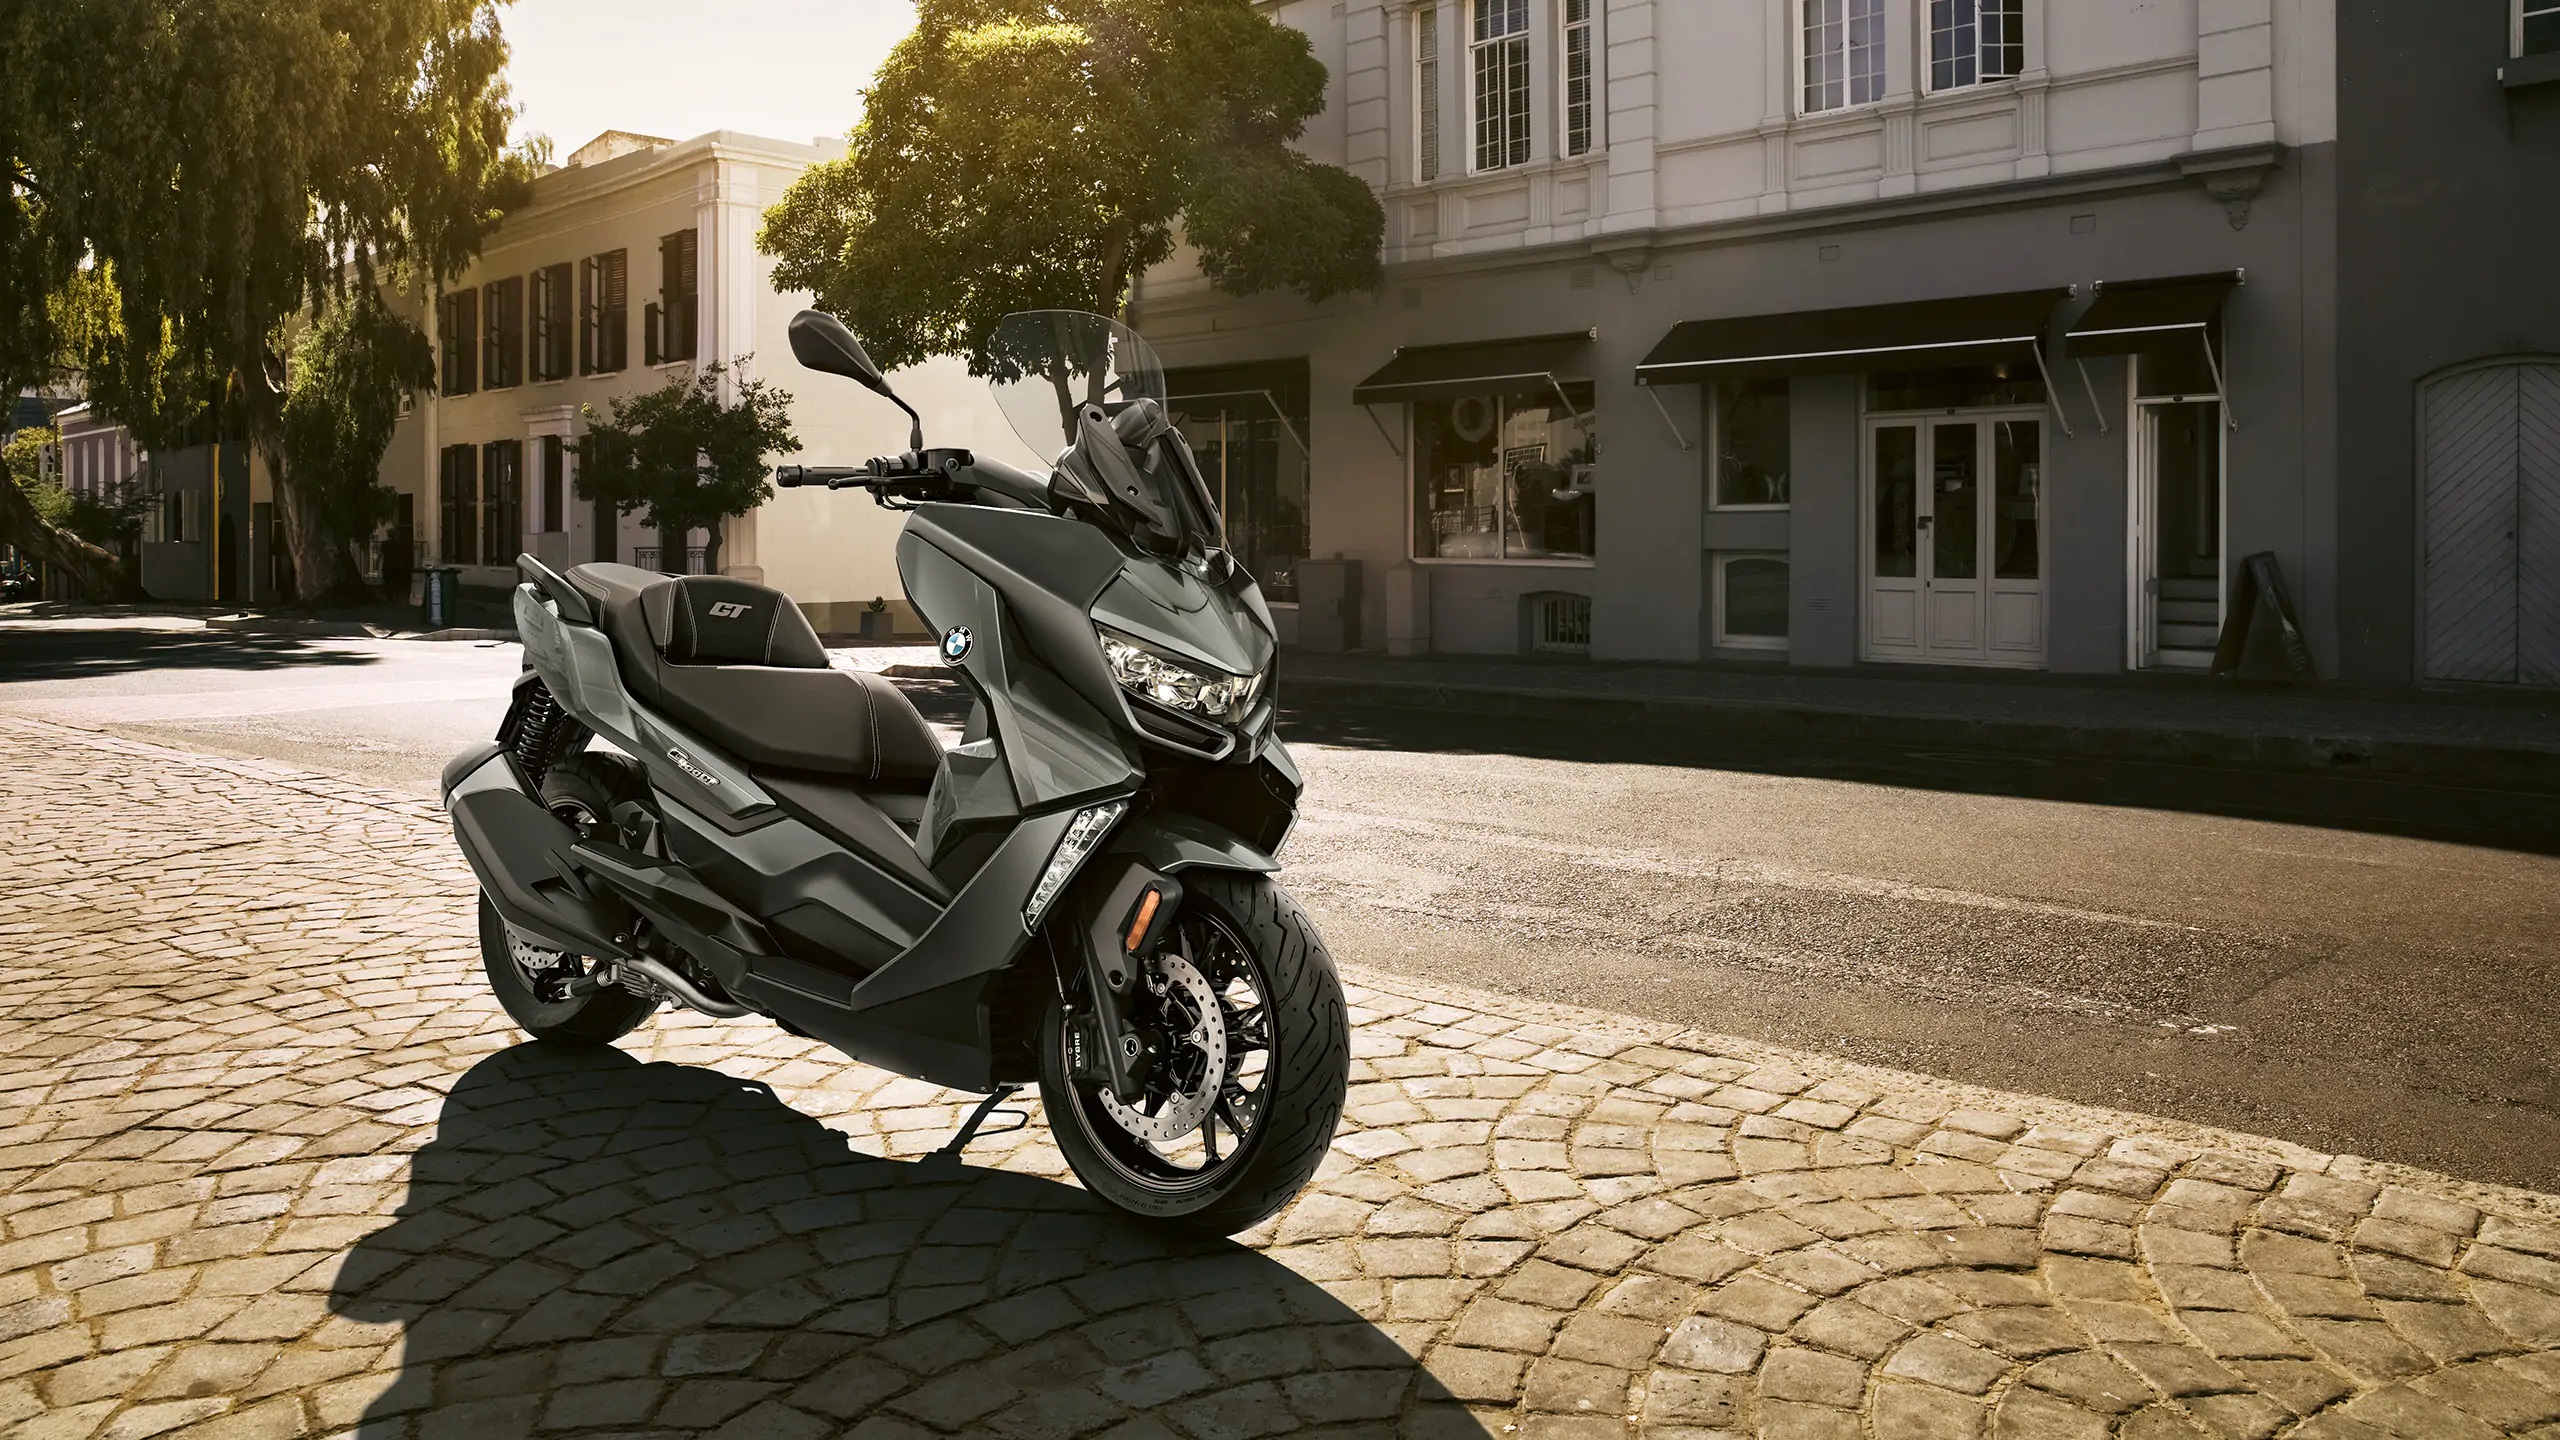 Cafe jern legering BMW C 400 X | Motor Scooter Guide